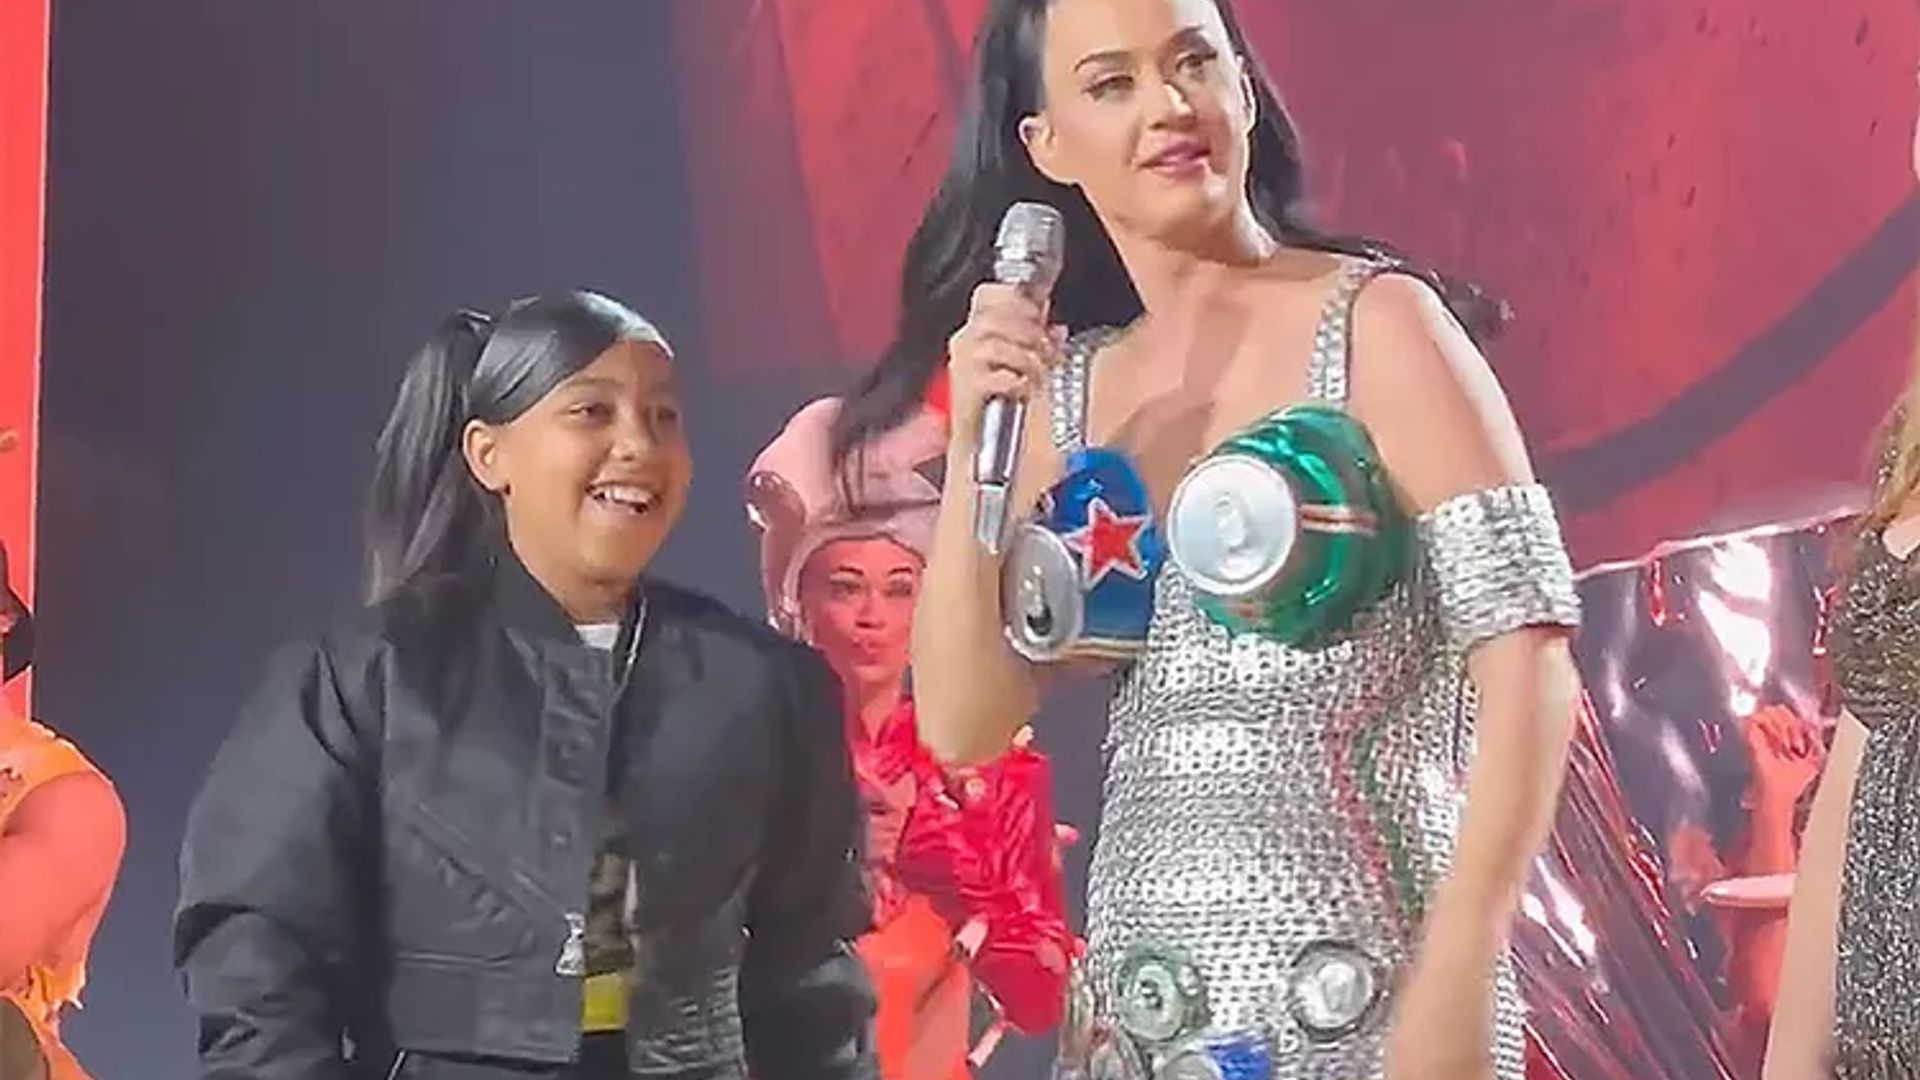 Katy Perry surprises fans with North West joining her on stage during Las Vegas residency